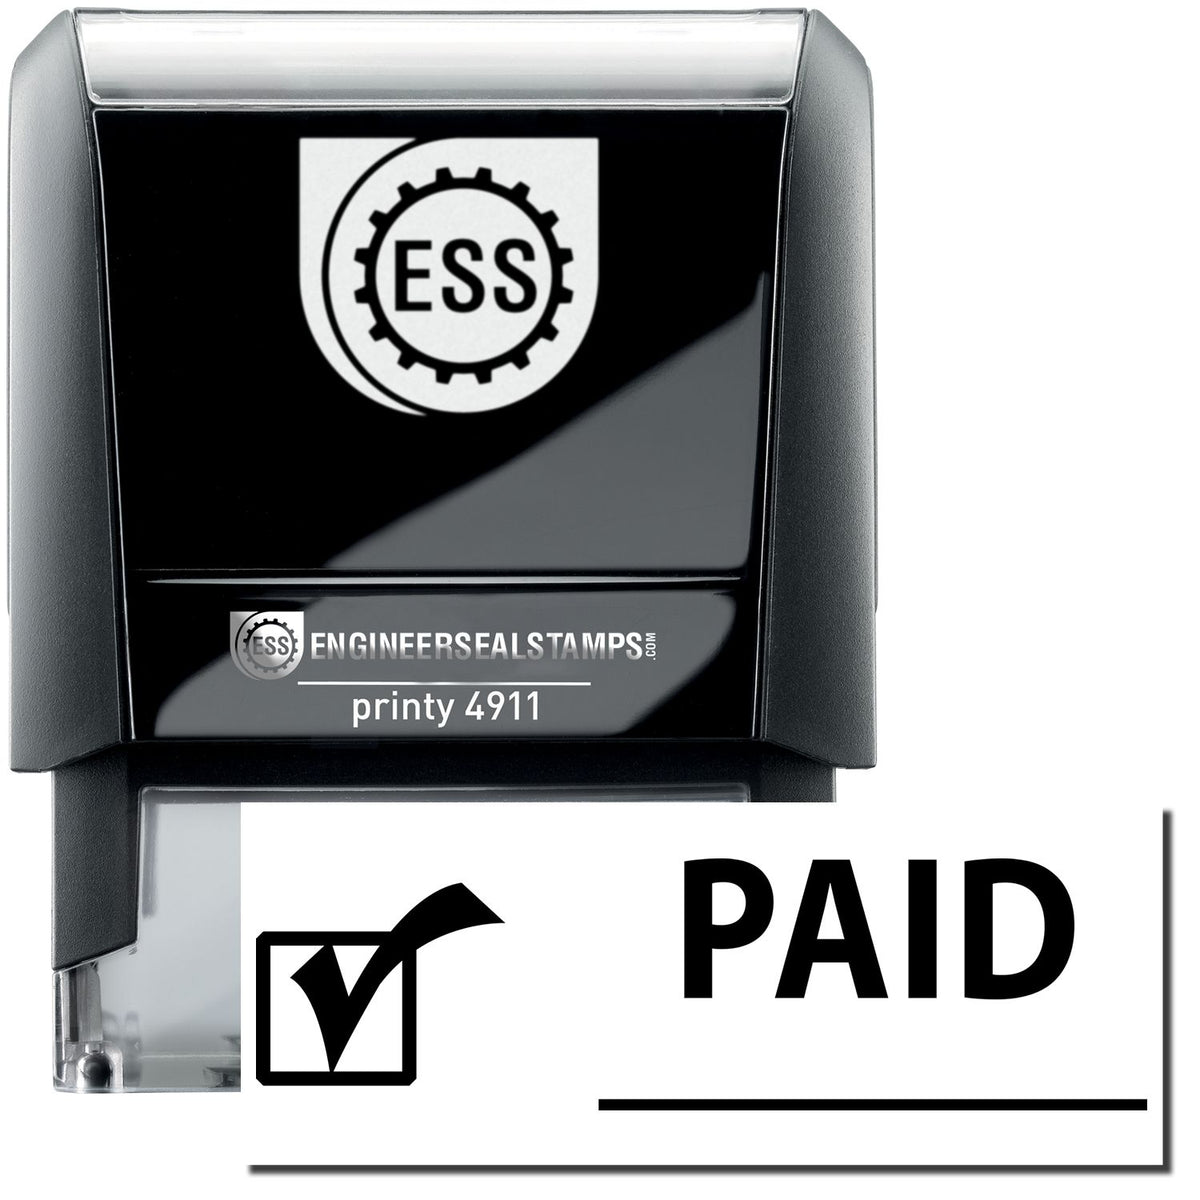 A self-inking stamp with a stamped image showing how the text &quot;PAID&quot; with a checkmark icon on the left and a broad line on the right is displayed after stamping.